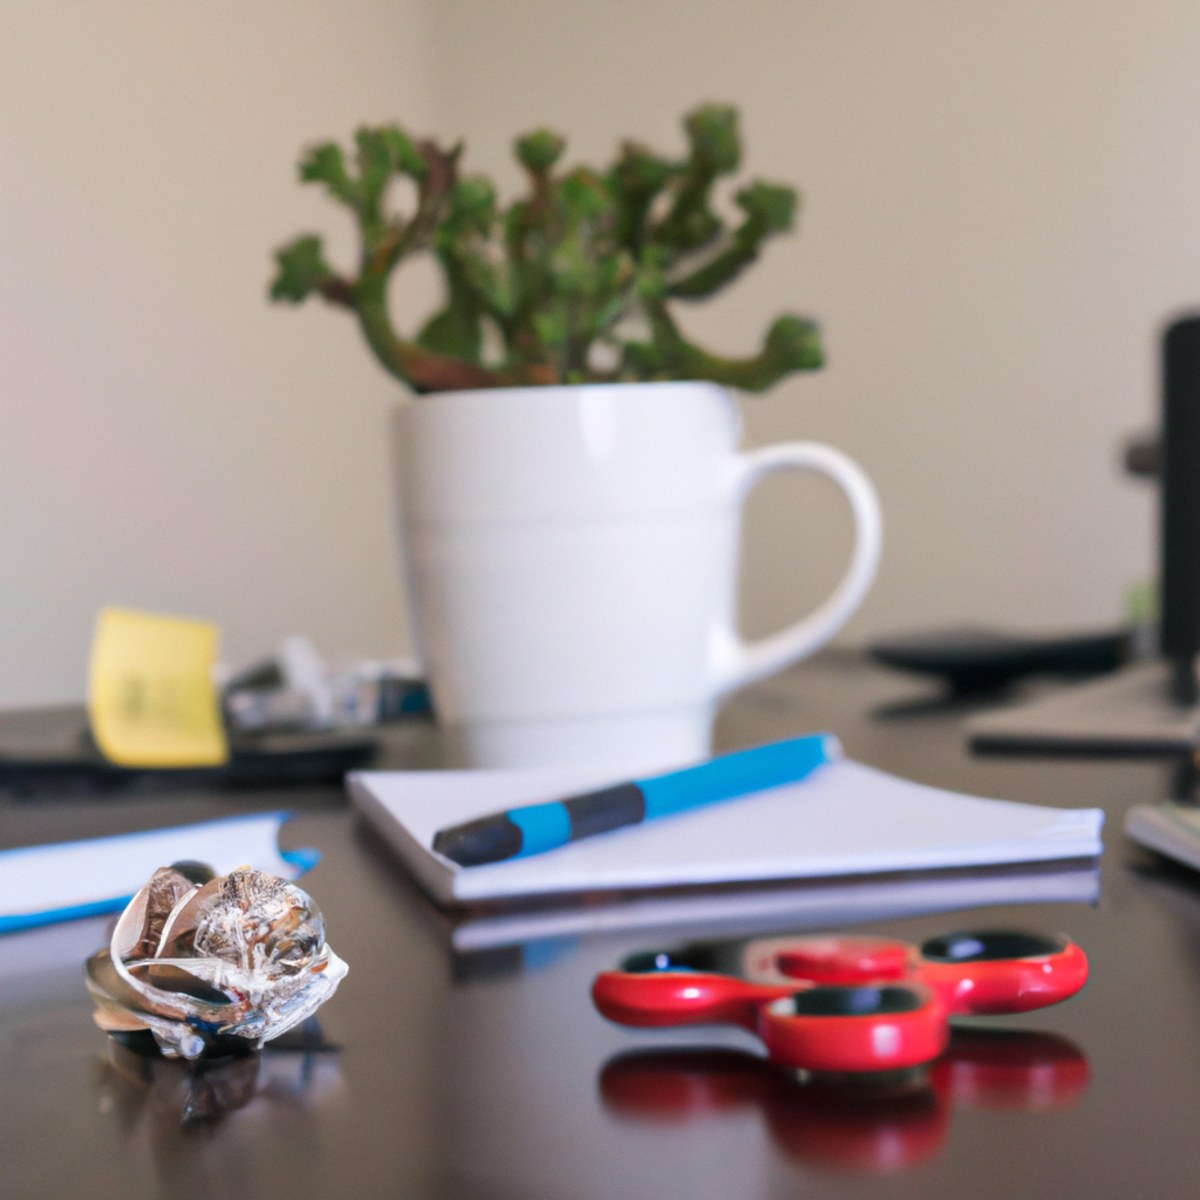 Cluttered desk with coffee, notepad, stress ball, fidget spinner, potted plant, and window. Reminder to prioritize self-care and stress management.